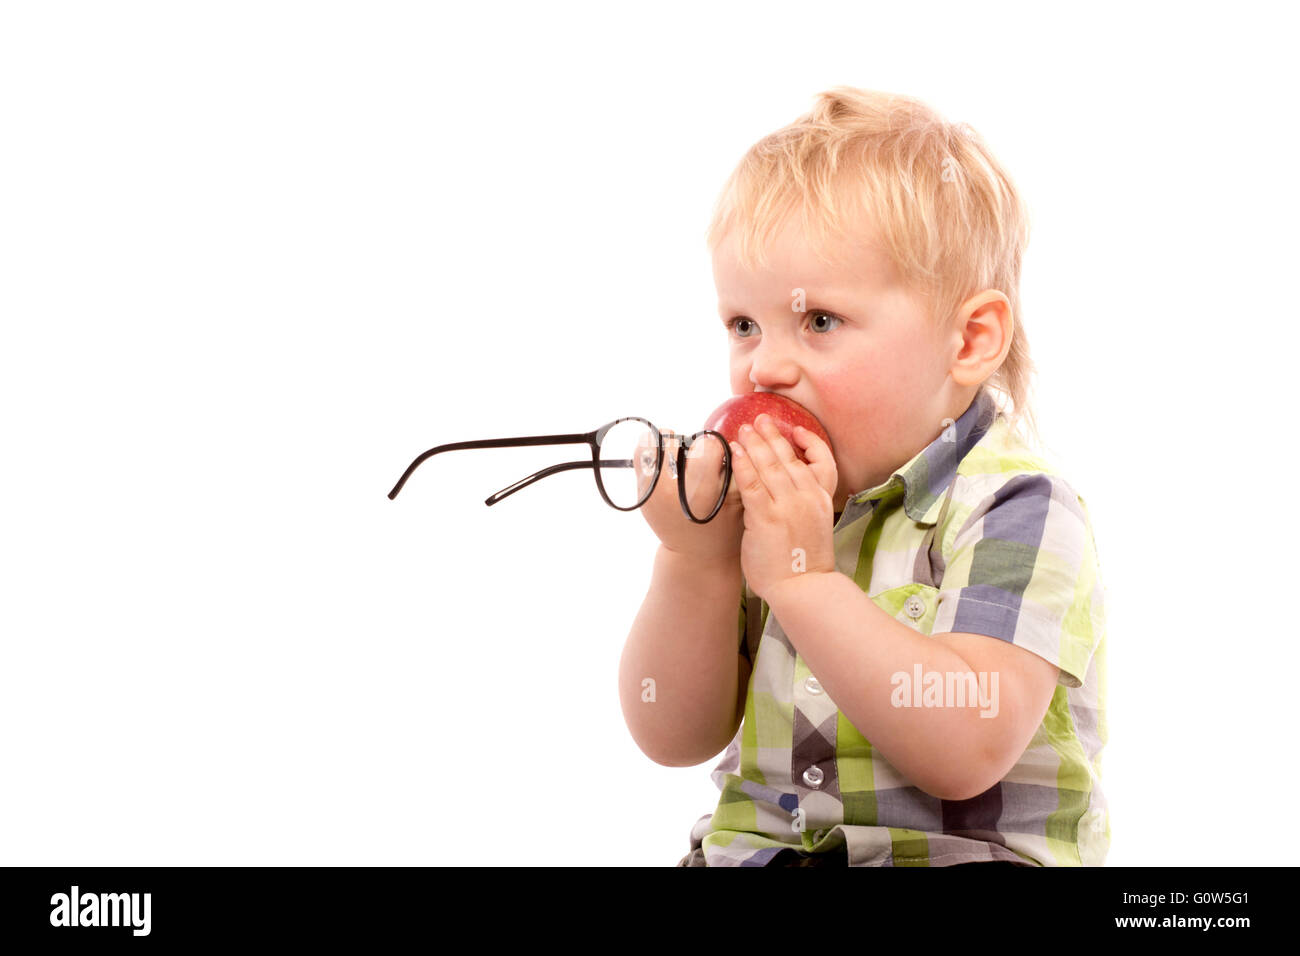 Funny boy with red apple and glasses, close up portrait, isolated on white Stock Photo